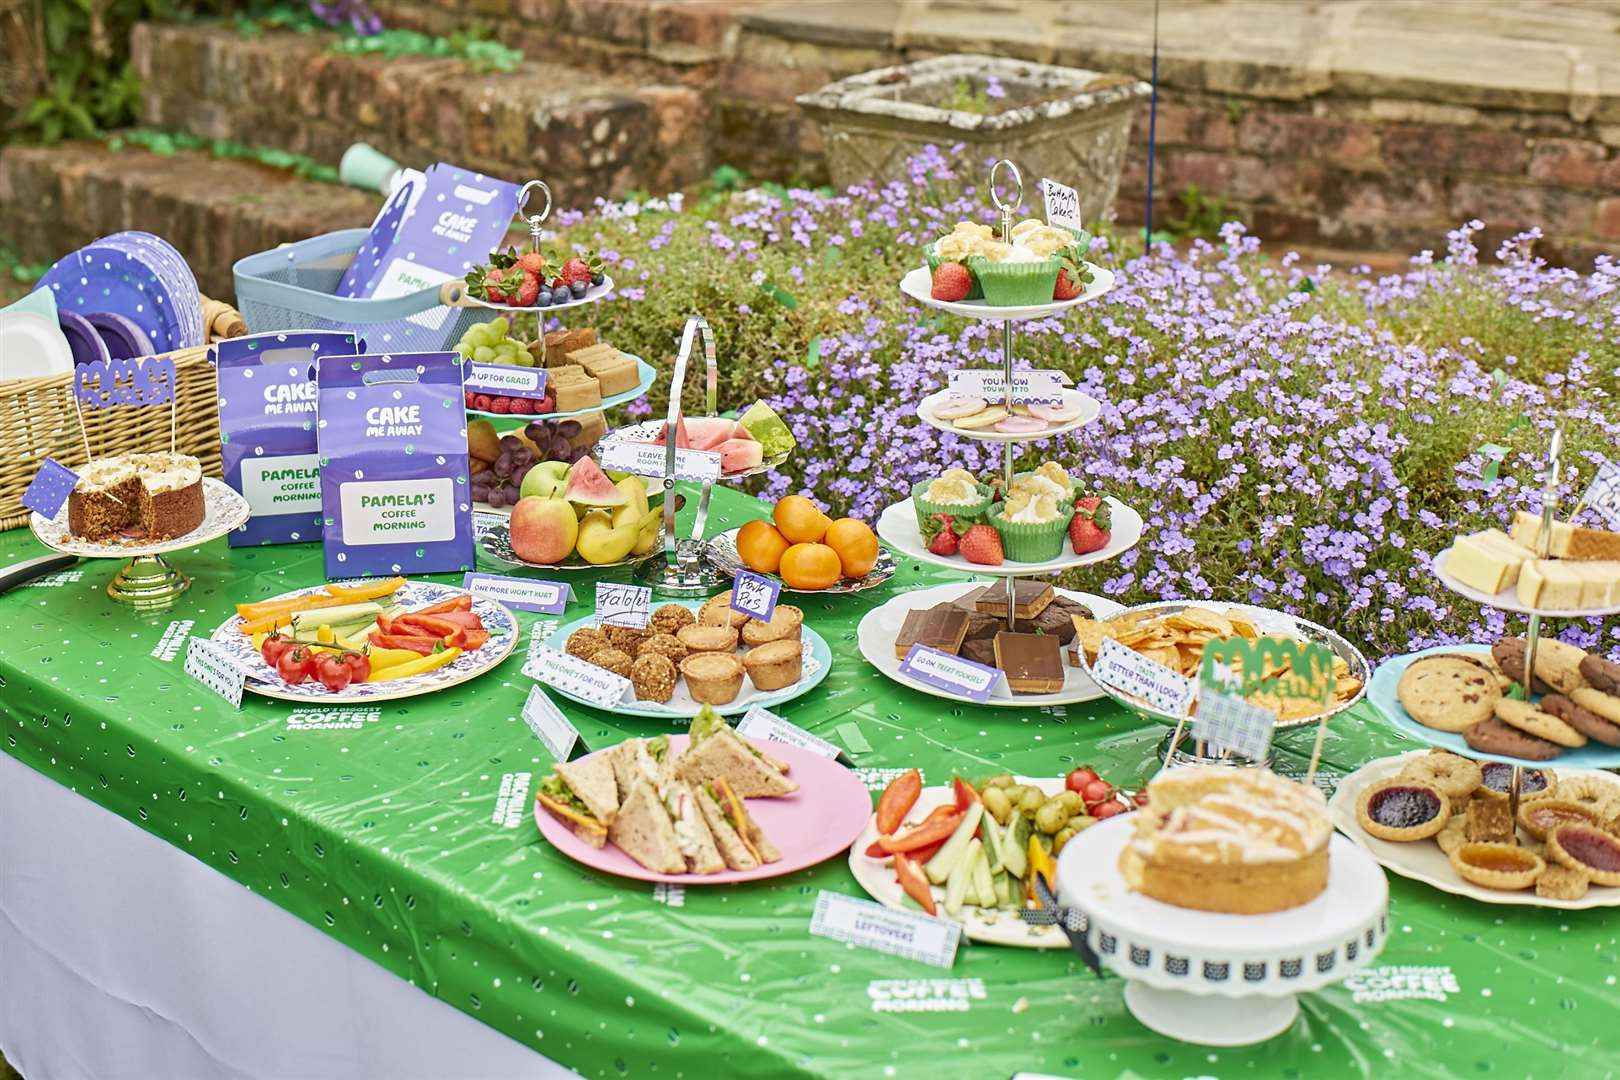 There are still lots of ways to get involved in supporting Macmillan's annual coffee morning fundraiser.